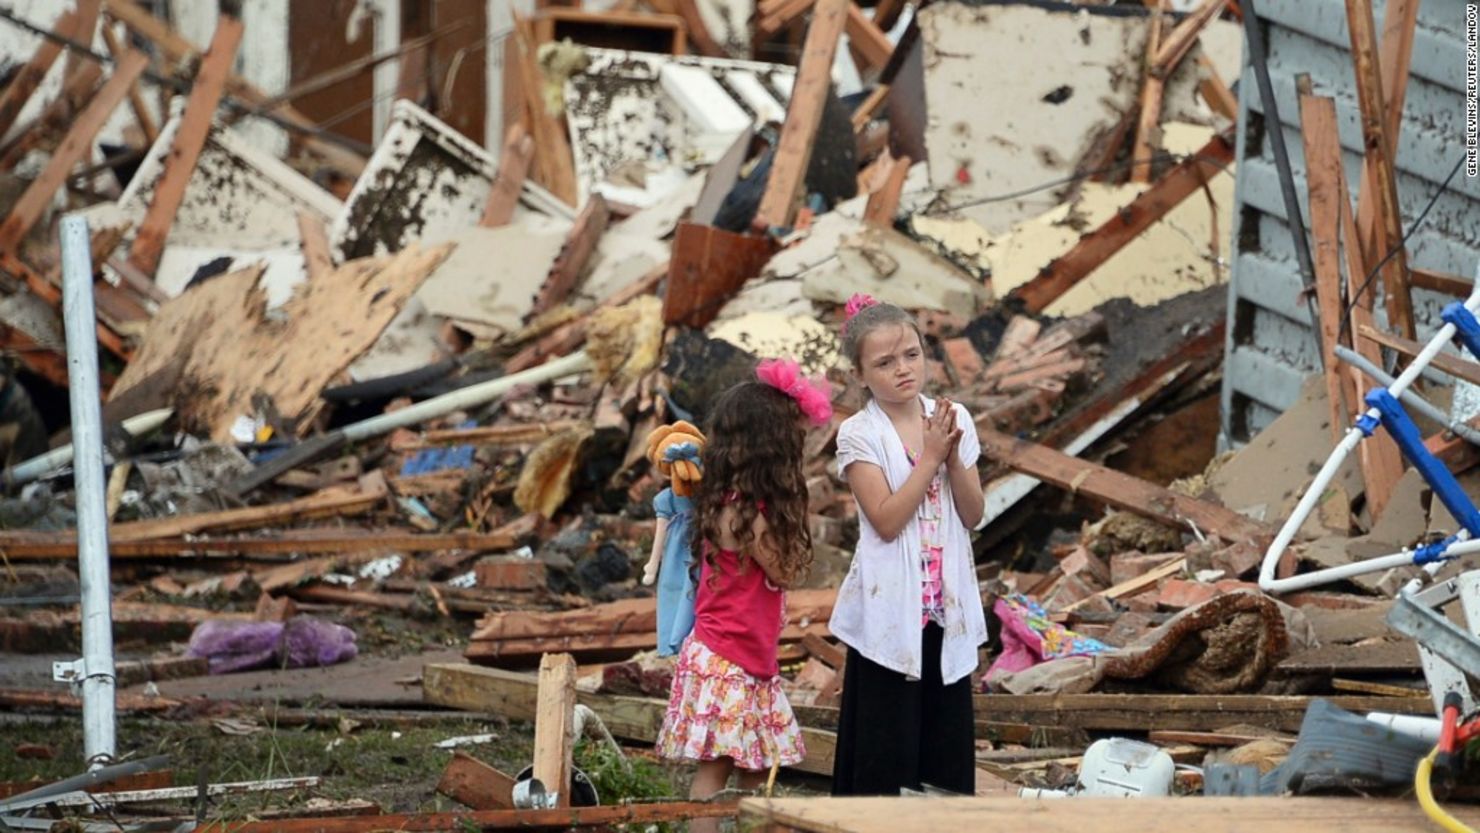 Two girls stand in rubble in Moore, Oklahoma. Melissa Brymer says parents can help kids by being honest and listening.